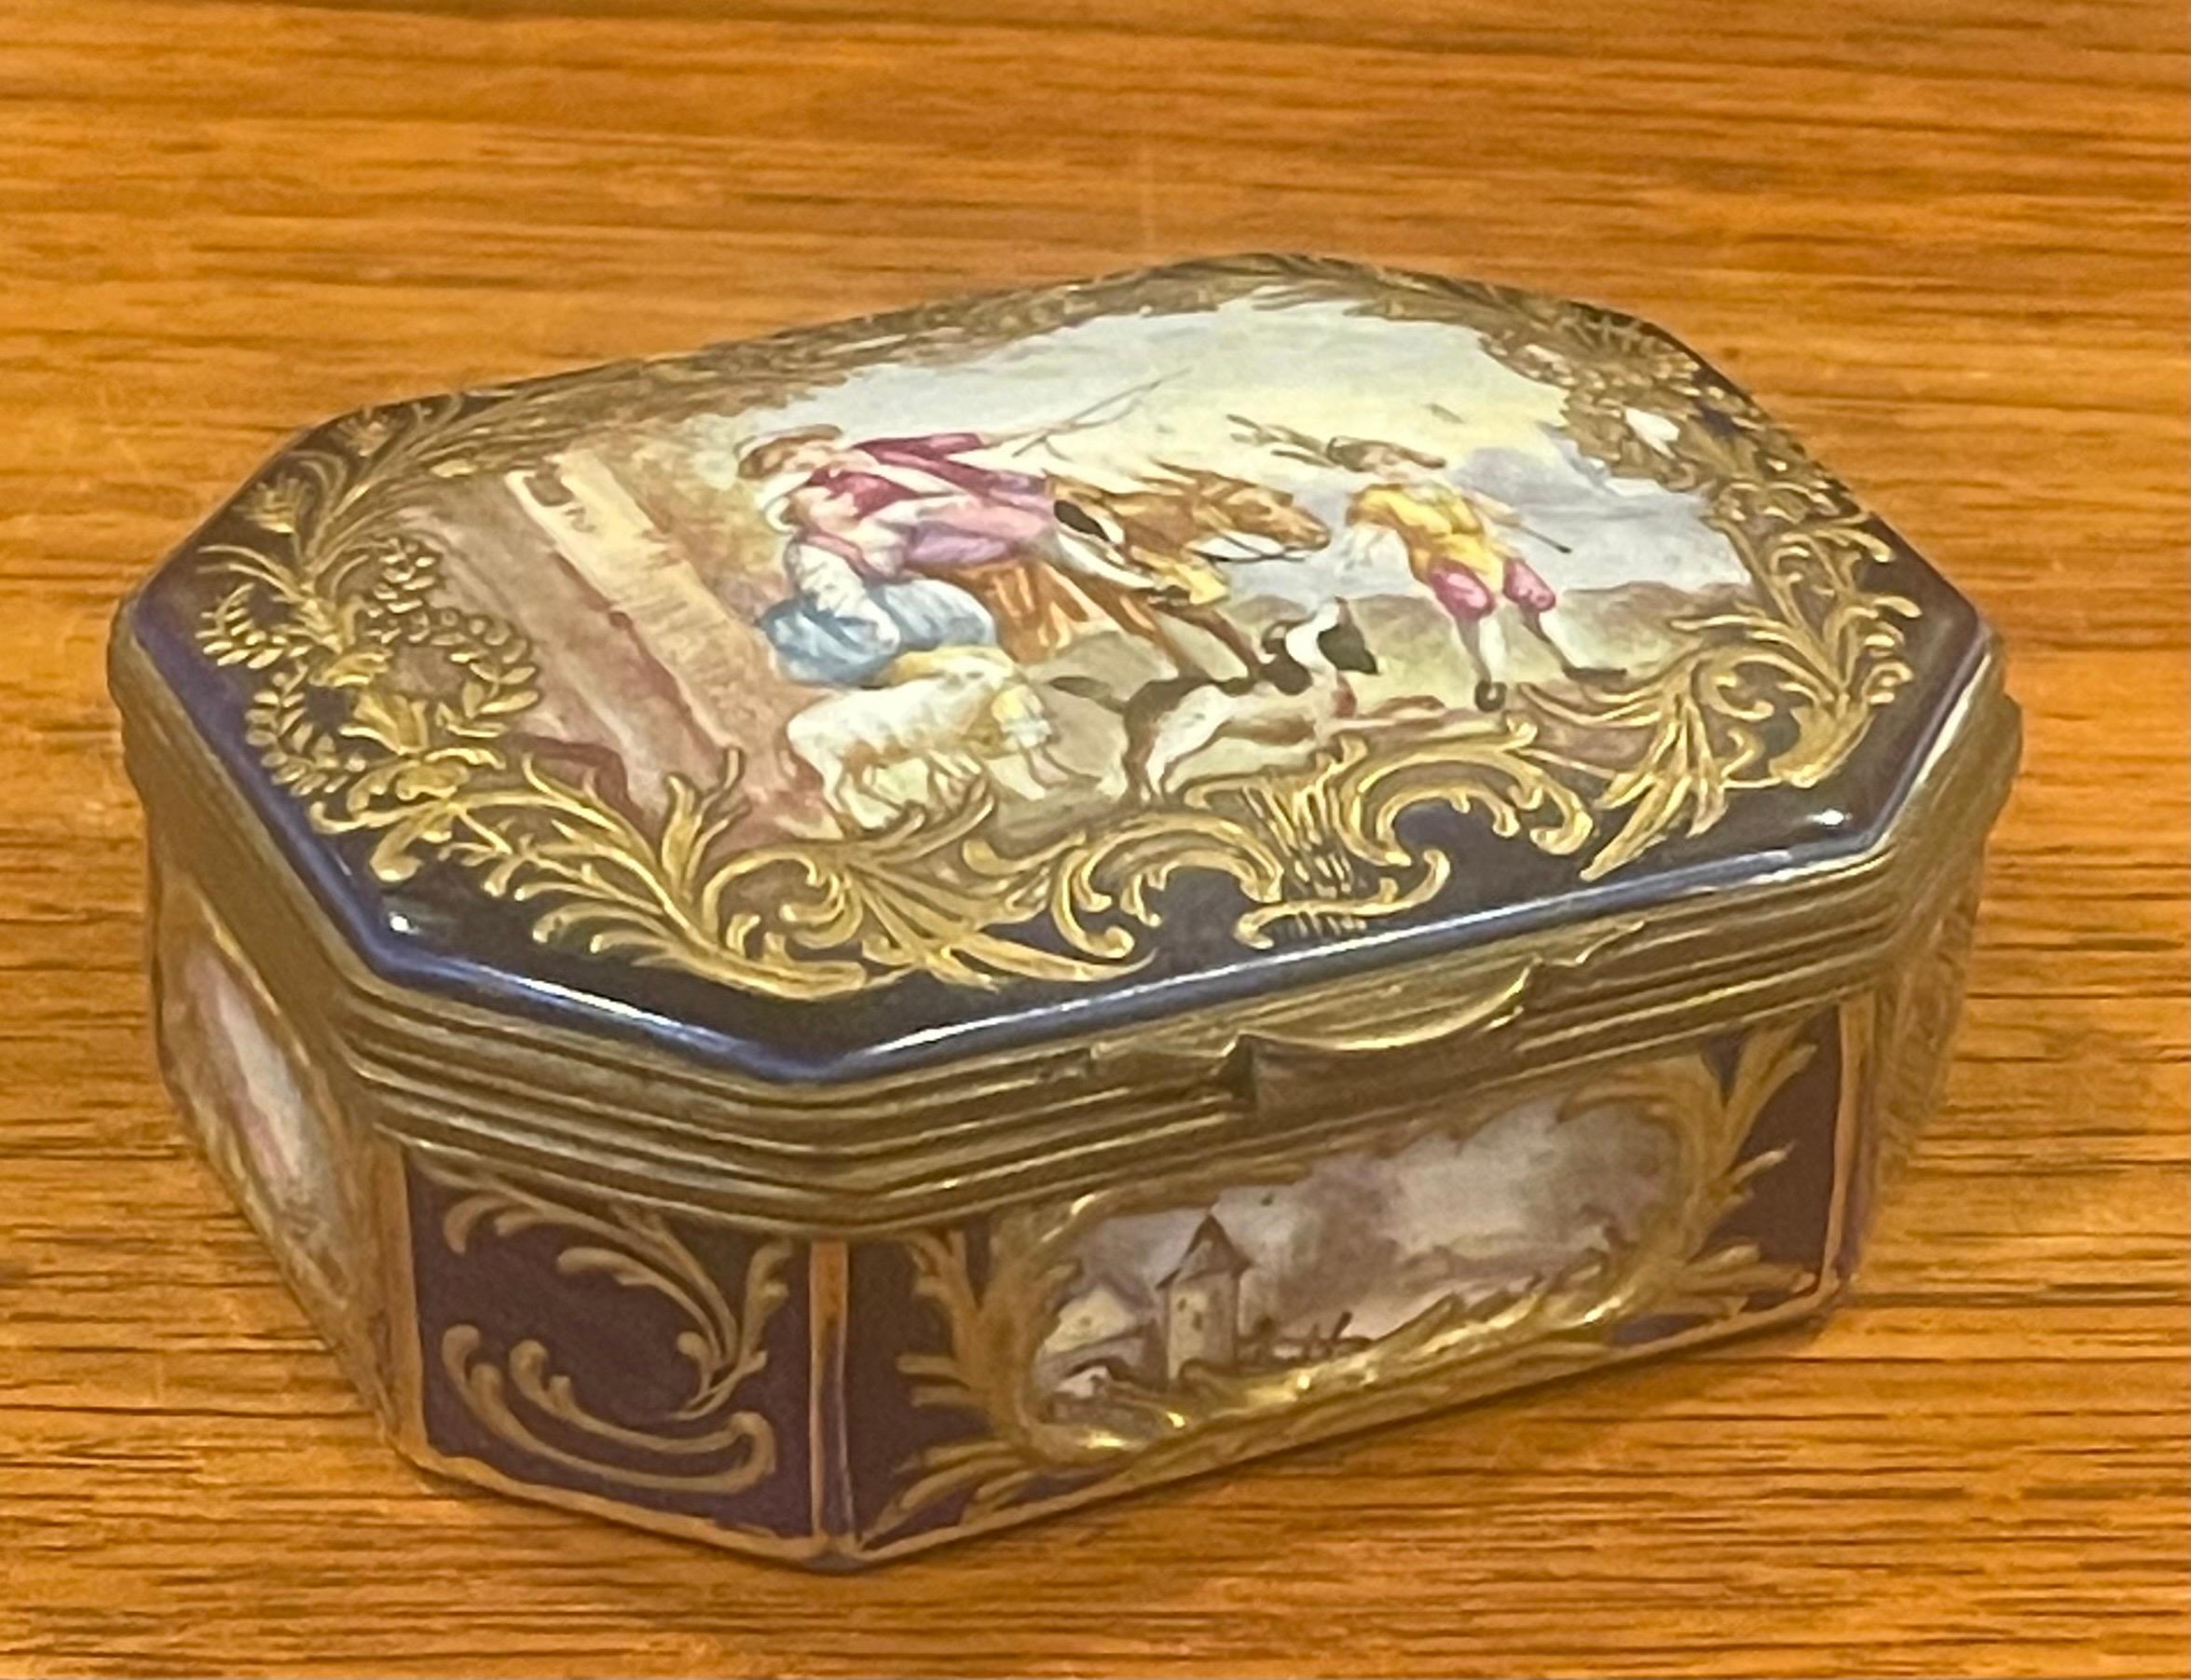 French 18th Century Victorian Enamel and Ormulu Lidded Box by Sevres